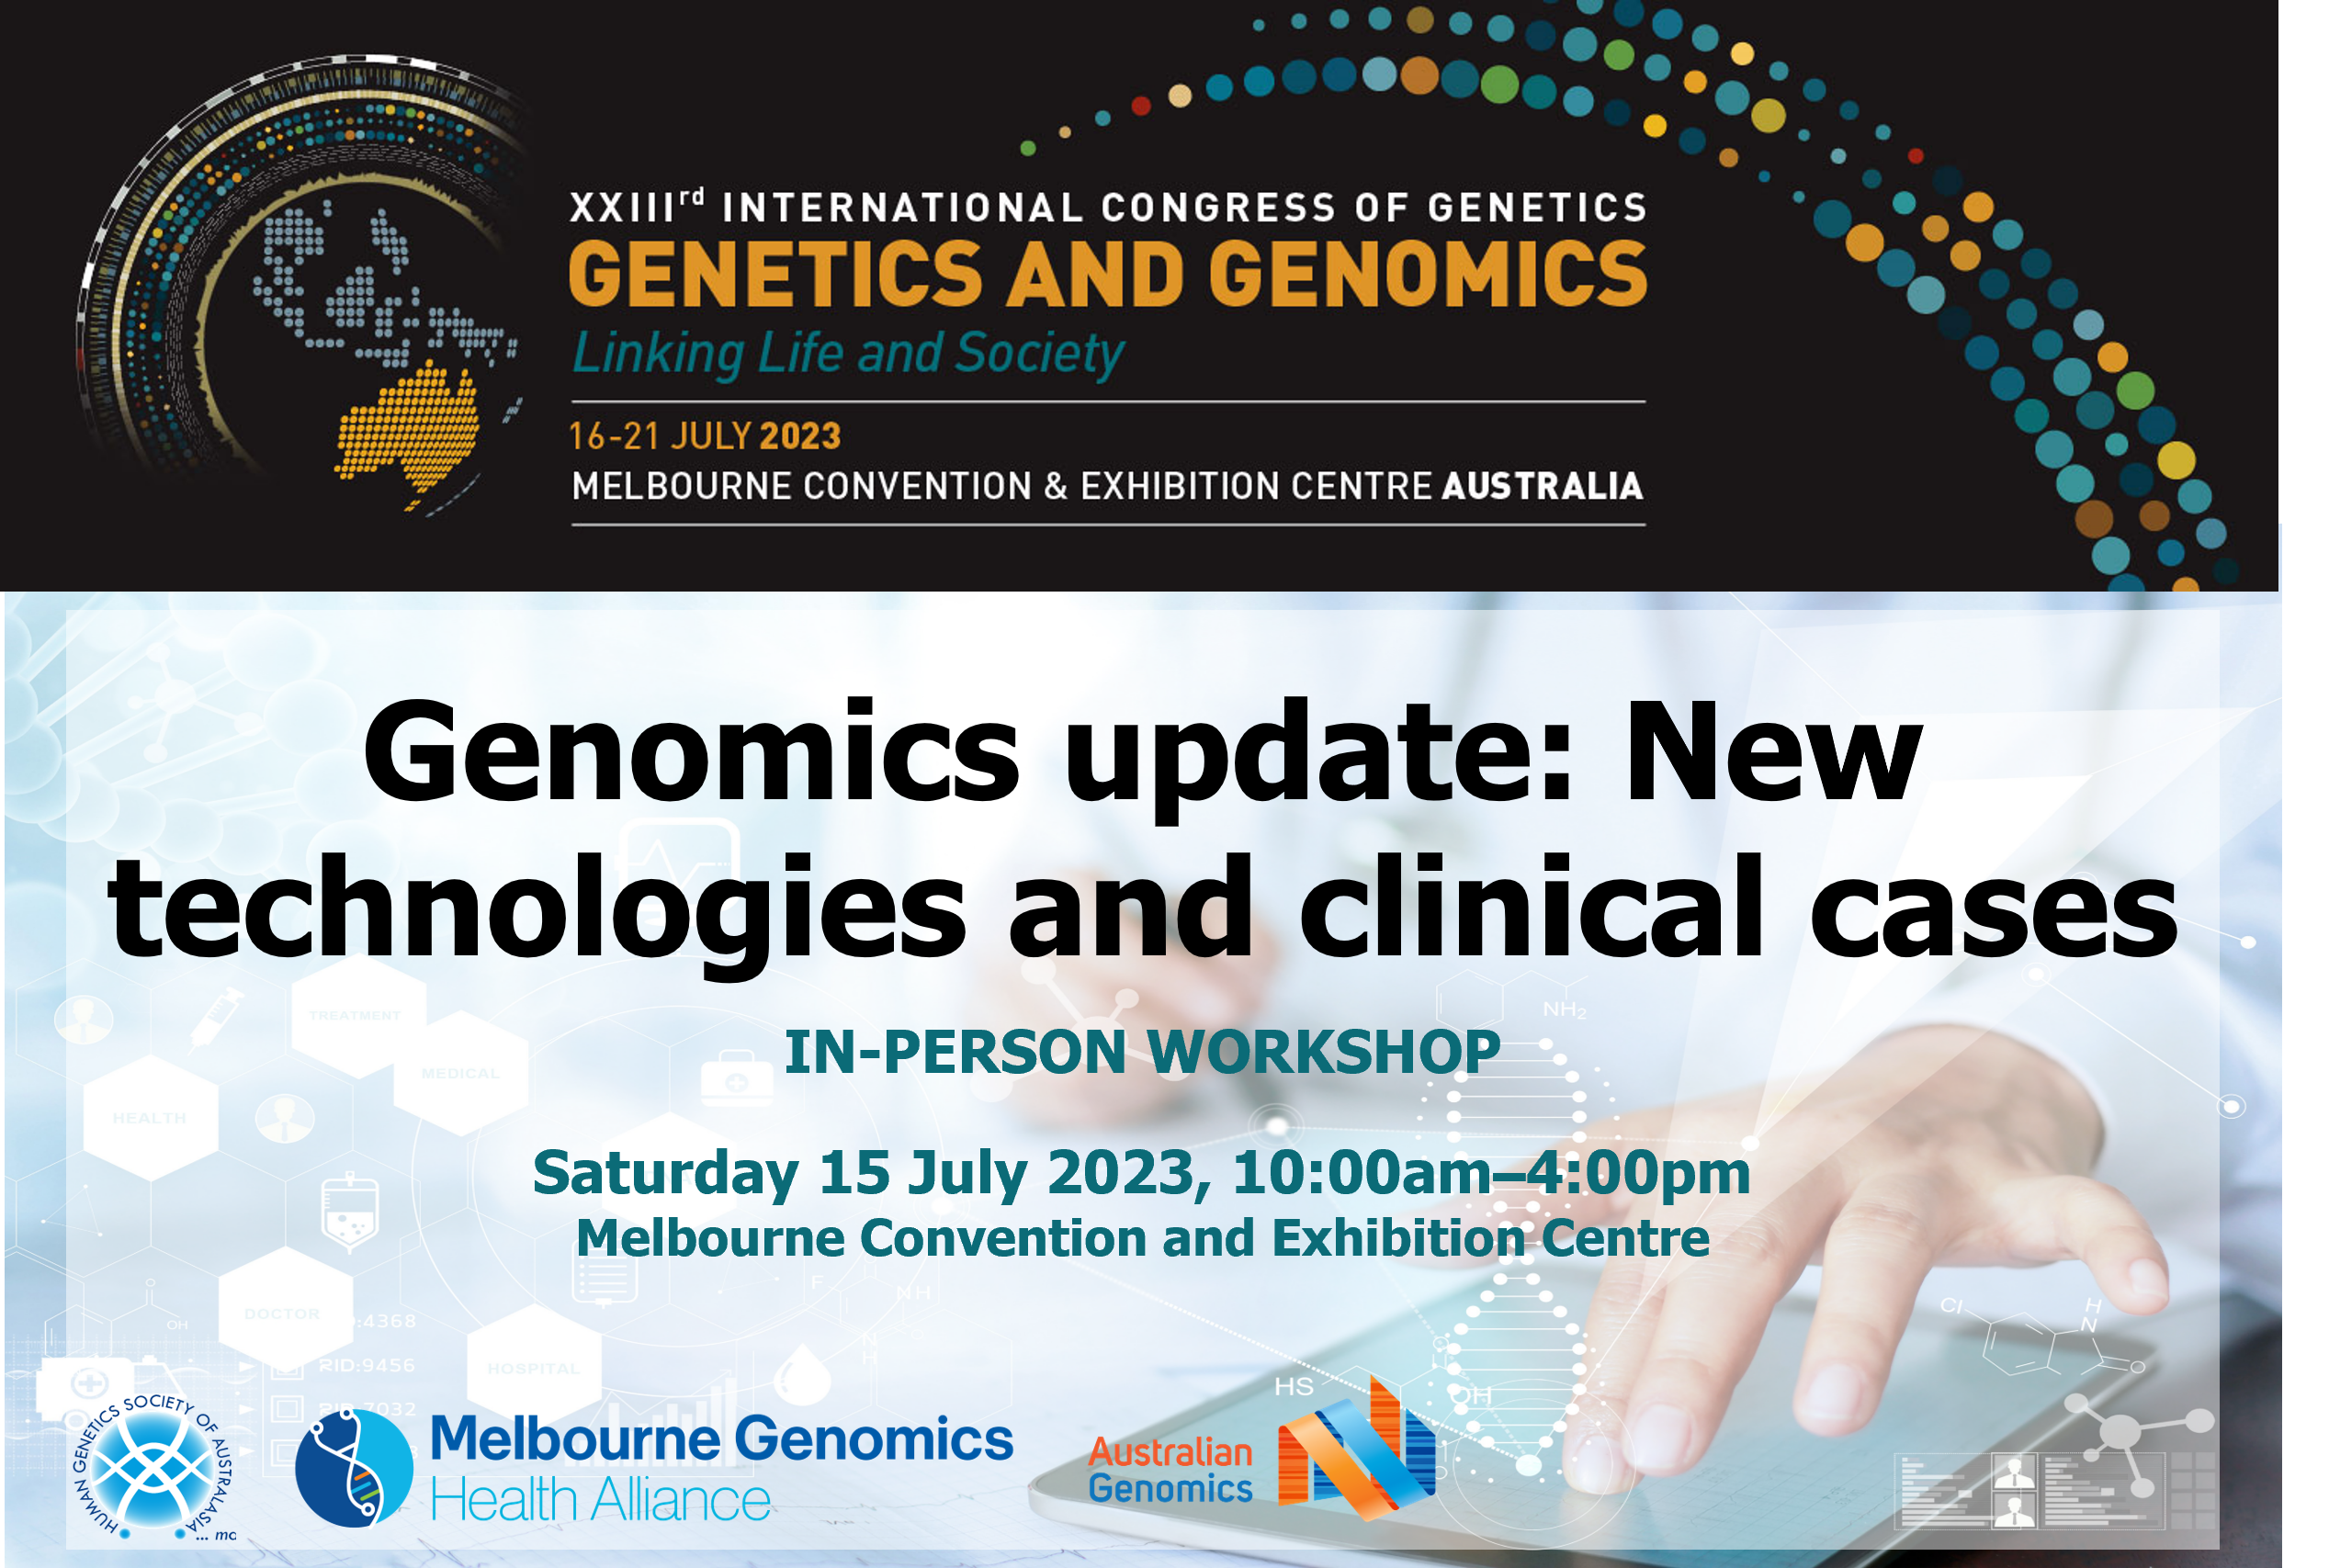 Saturday 15 July 2023. Genomics update: New technologies and clinical cases.